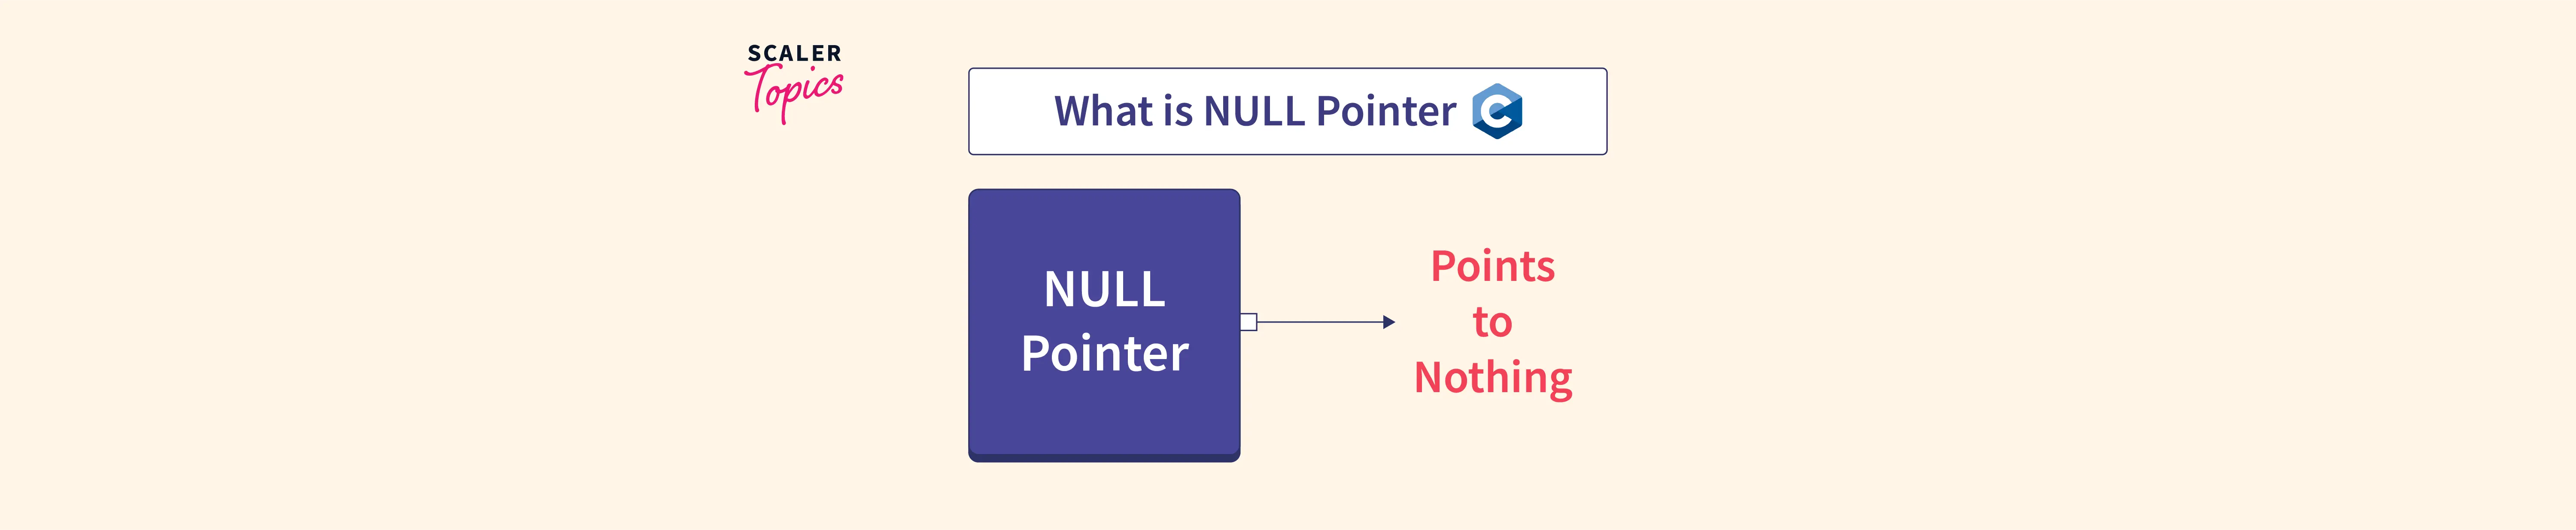 what is null pointer assignment error in c